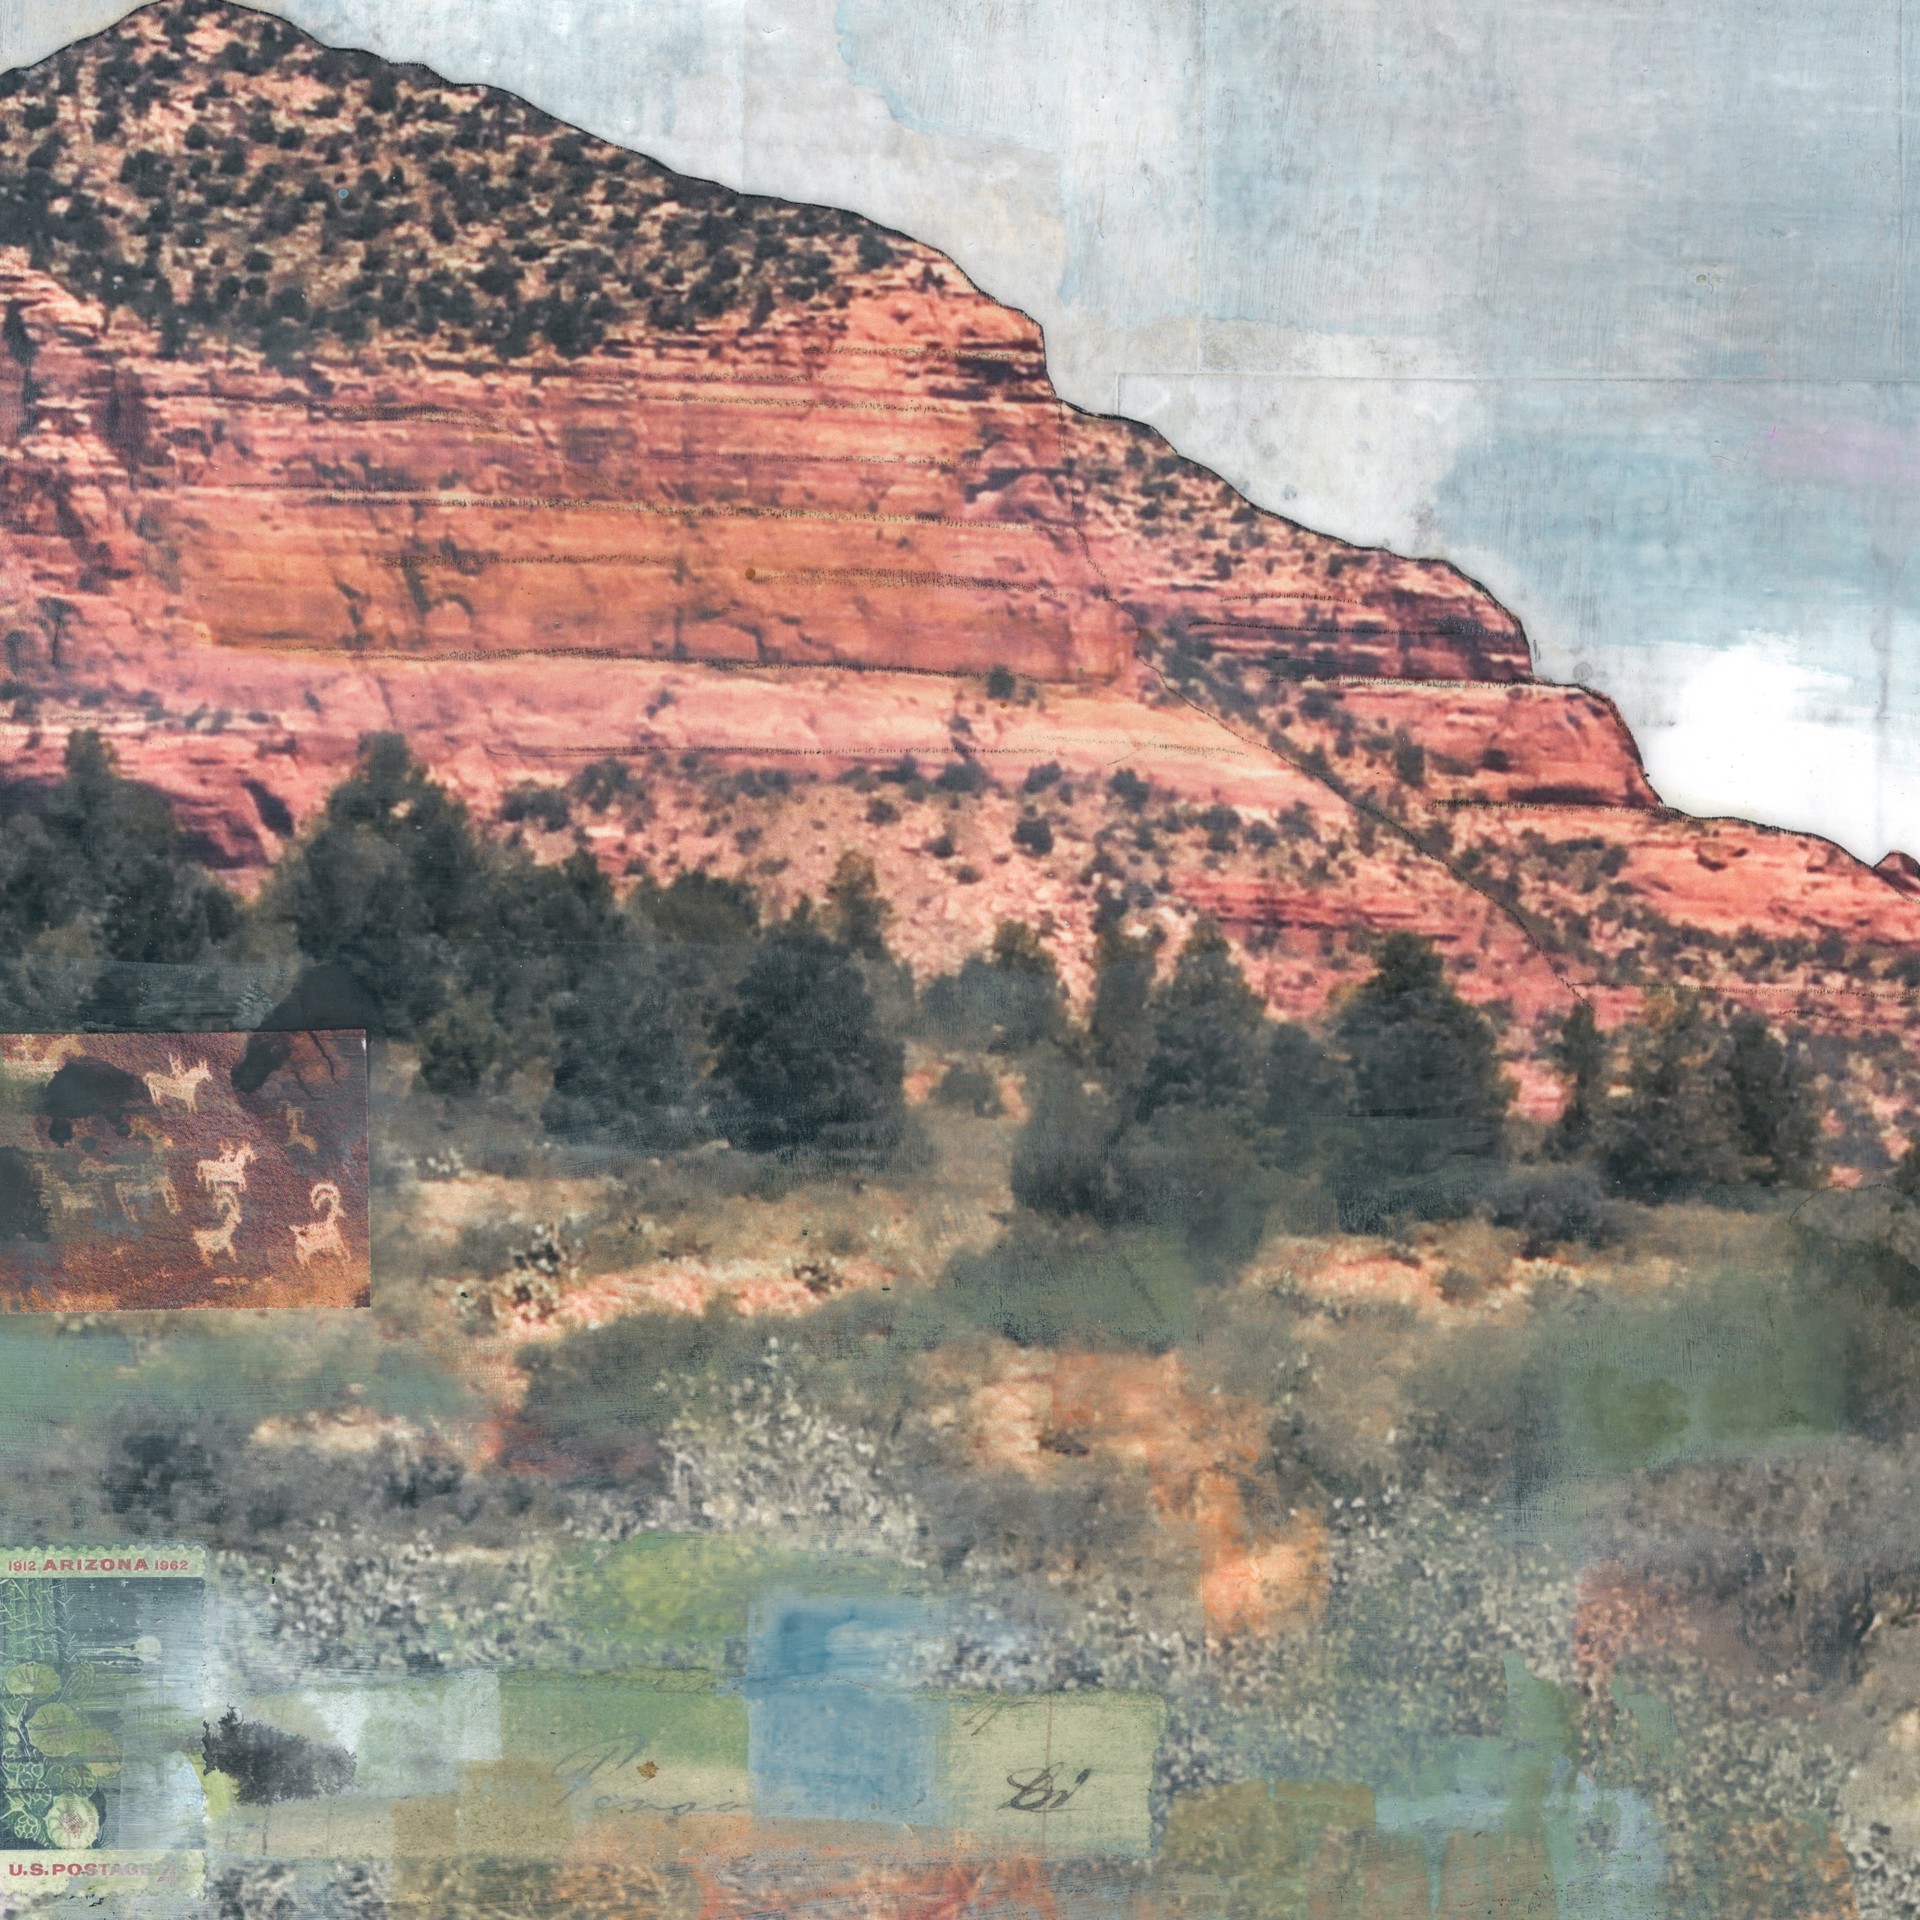 High Noon in Sedona by JC Spock